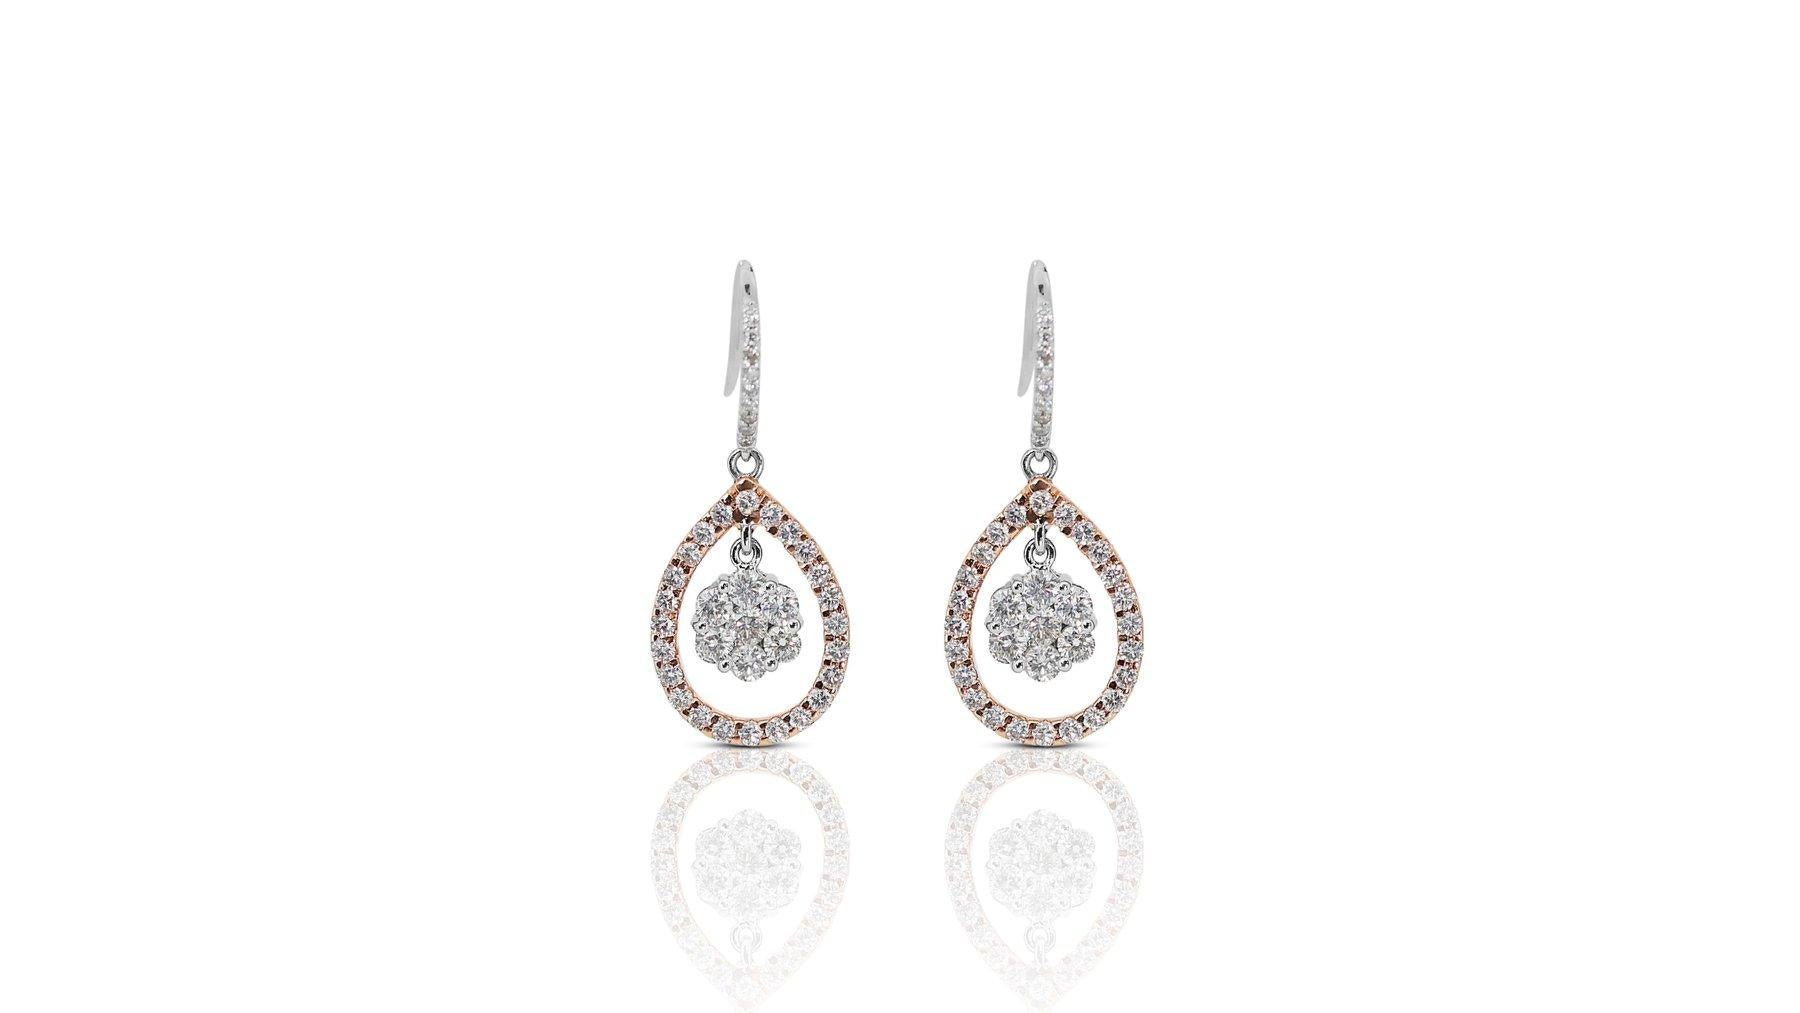 Women's Stunning Diamond Earrings with Dazzling 2.35 ct Round Brilliant cut Diamond For Sale